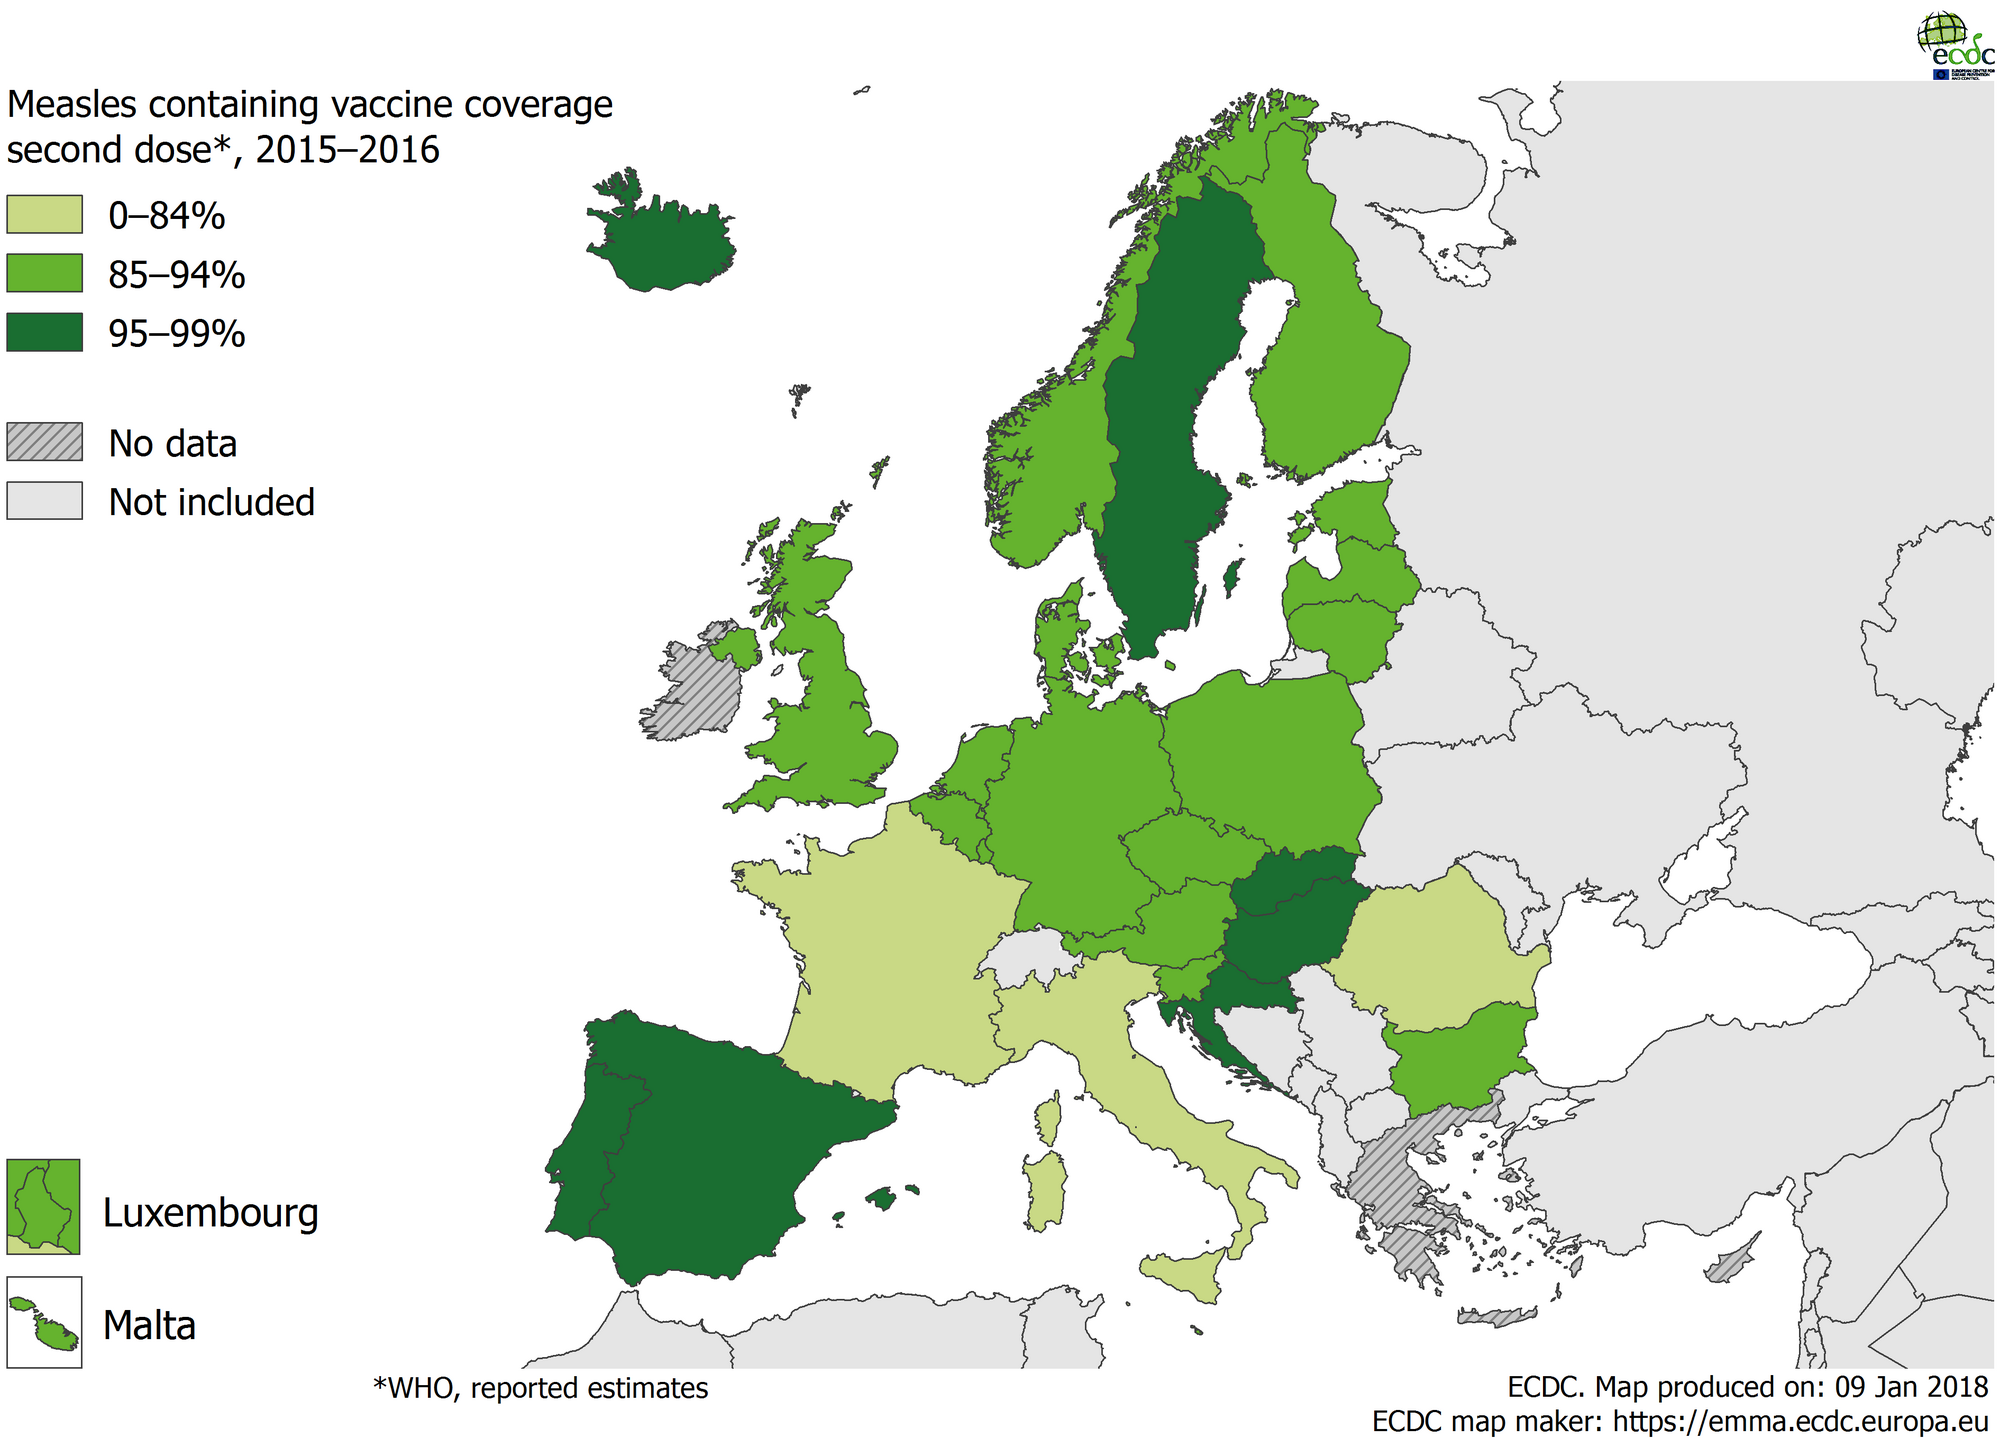 Vaccination coverage for the second dose of measles-containing vaccine by country, 2016, WHO, EU/EEA countries